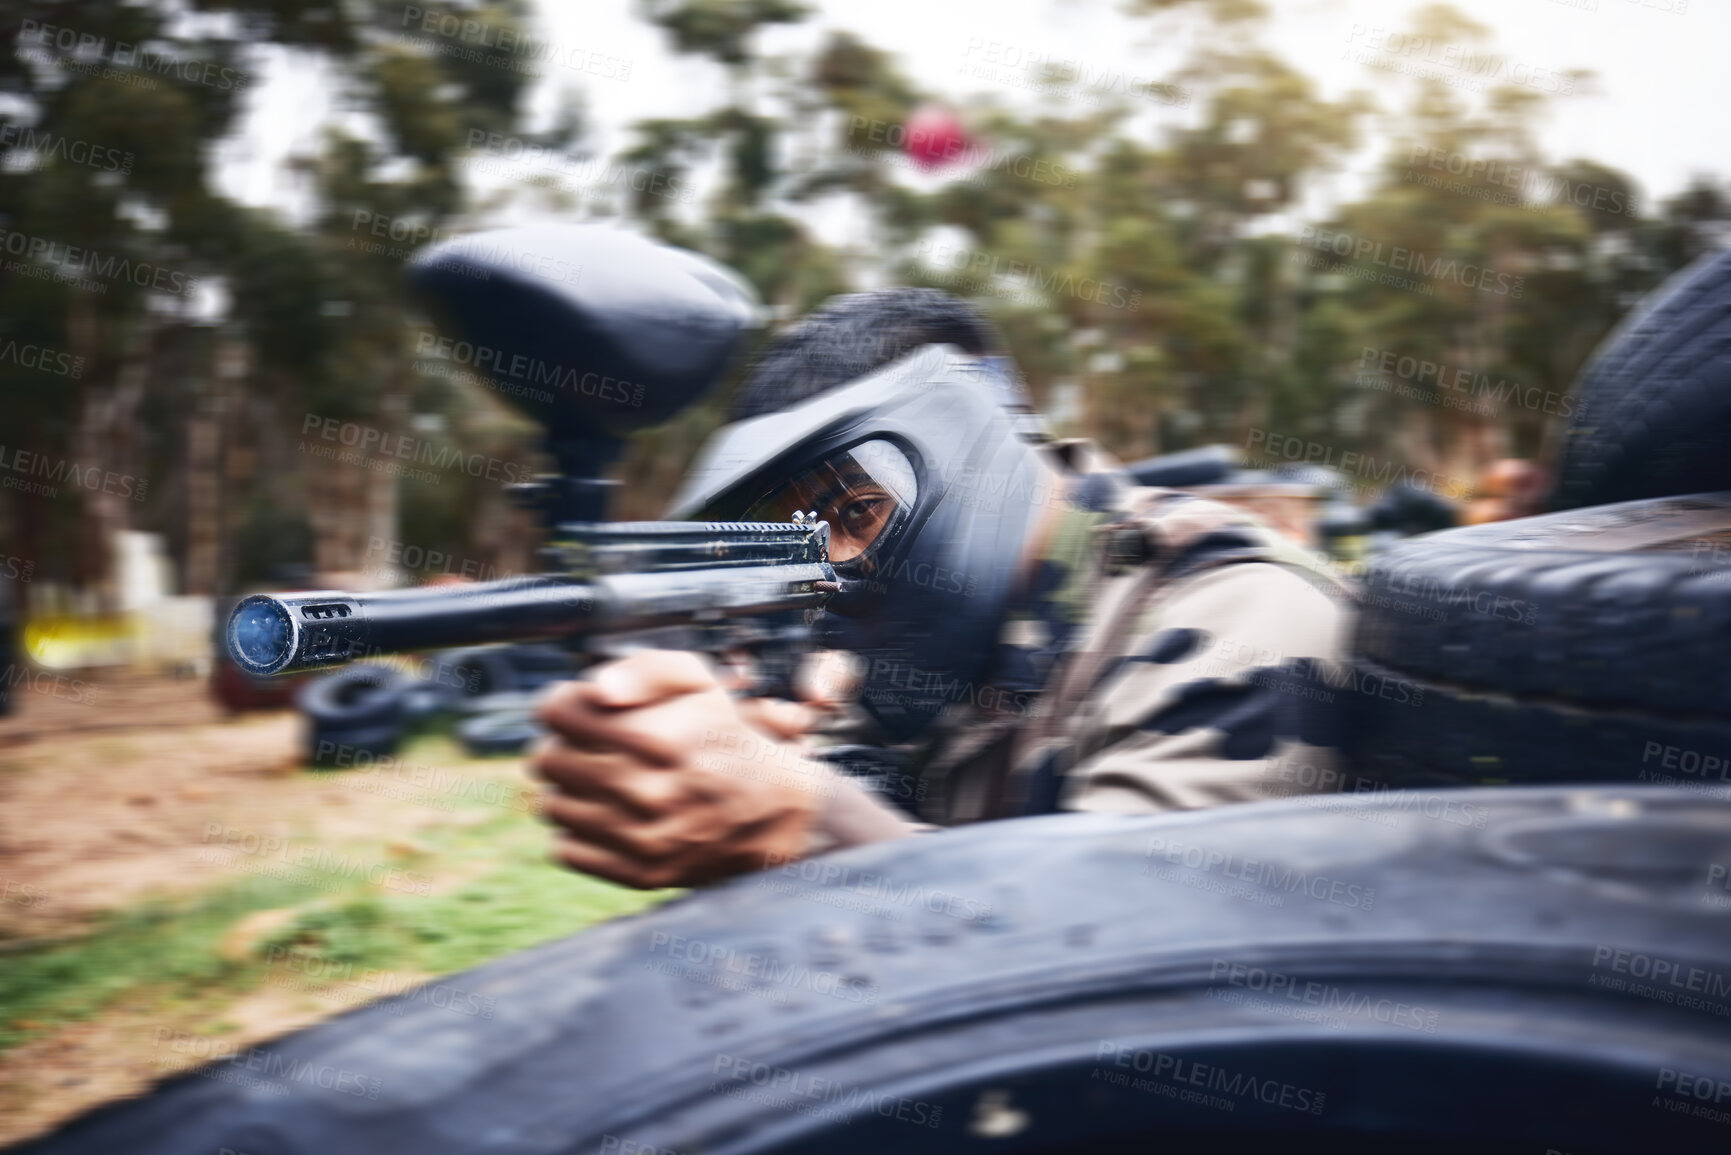 Buy stock photo Paintball, gun or man playing a shooting game with fast action on a fun battlefield on holiday. Military mission, fitness or player aiming with weapons gear for war survival in an outdoor competition